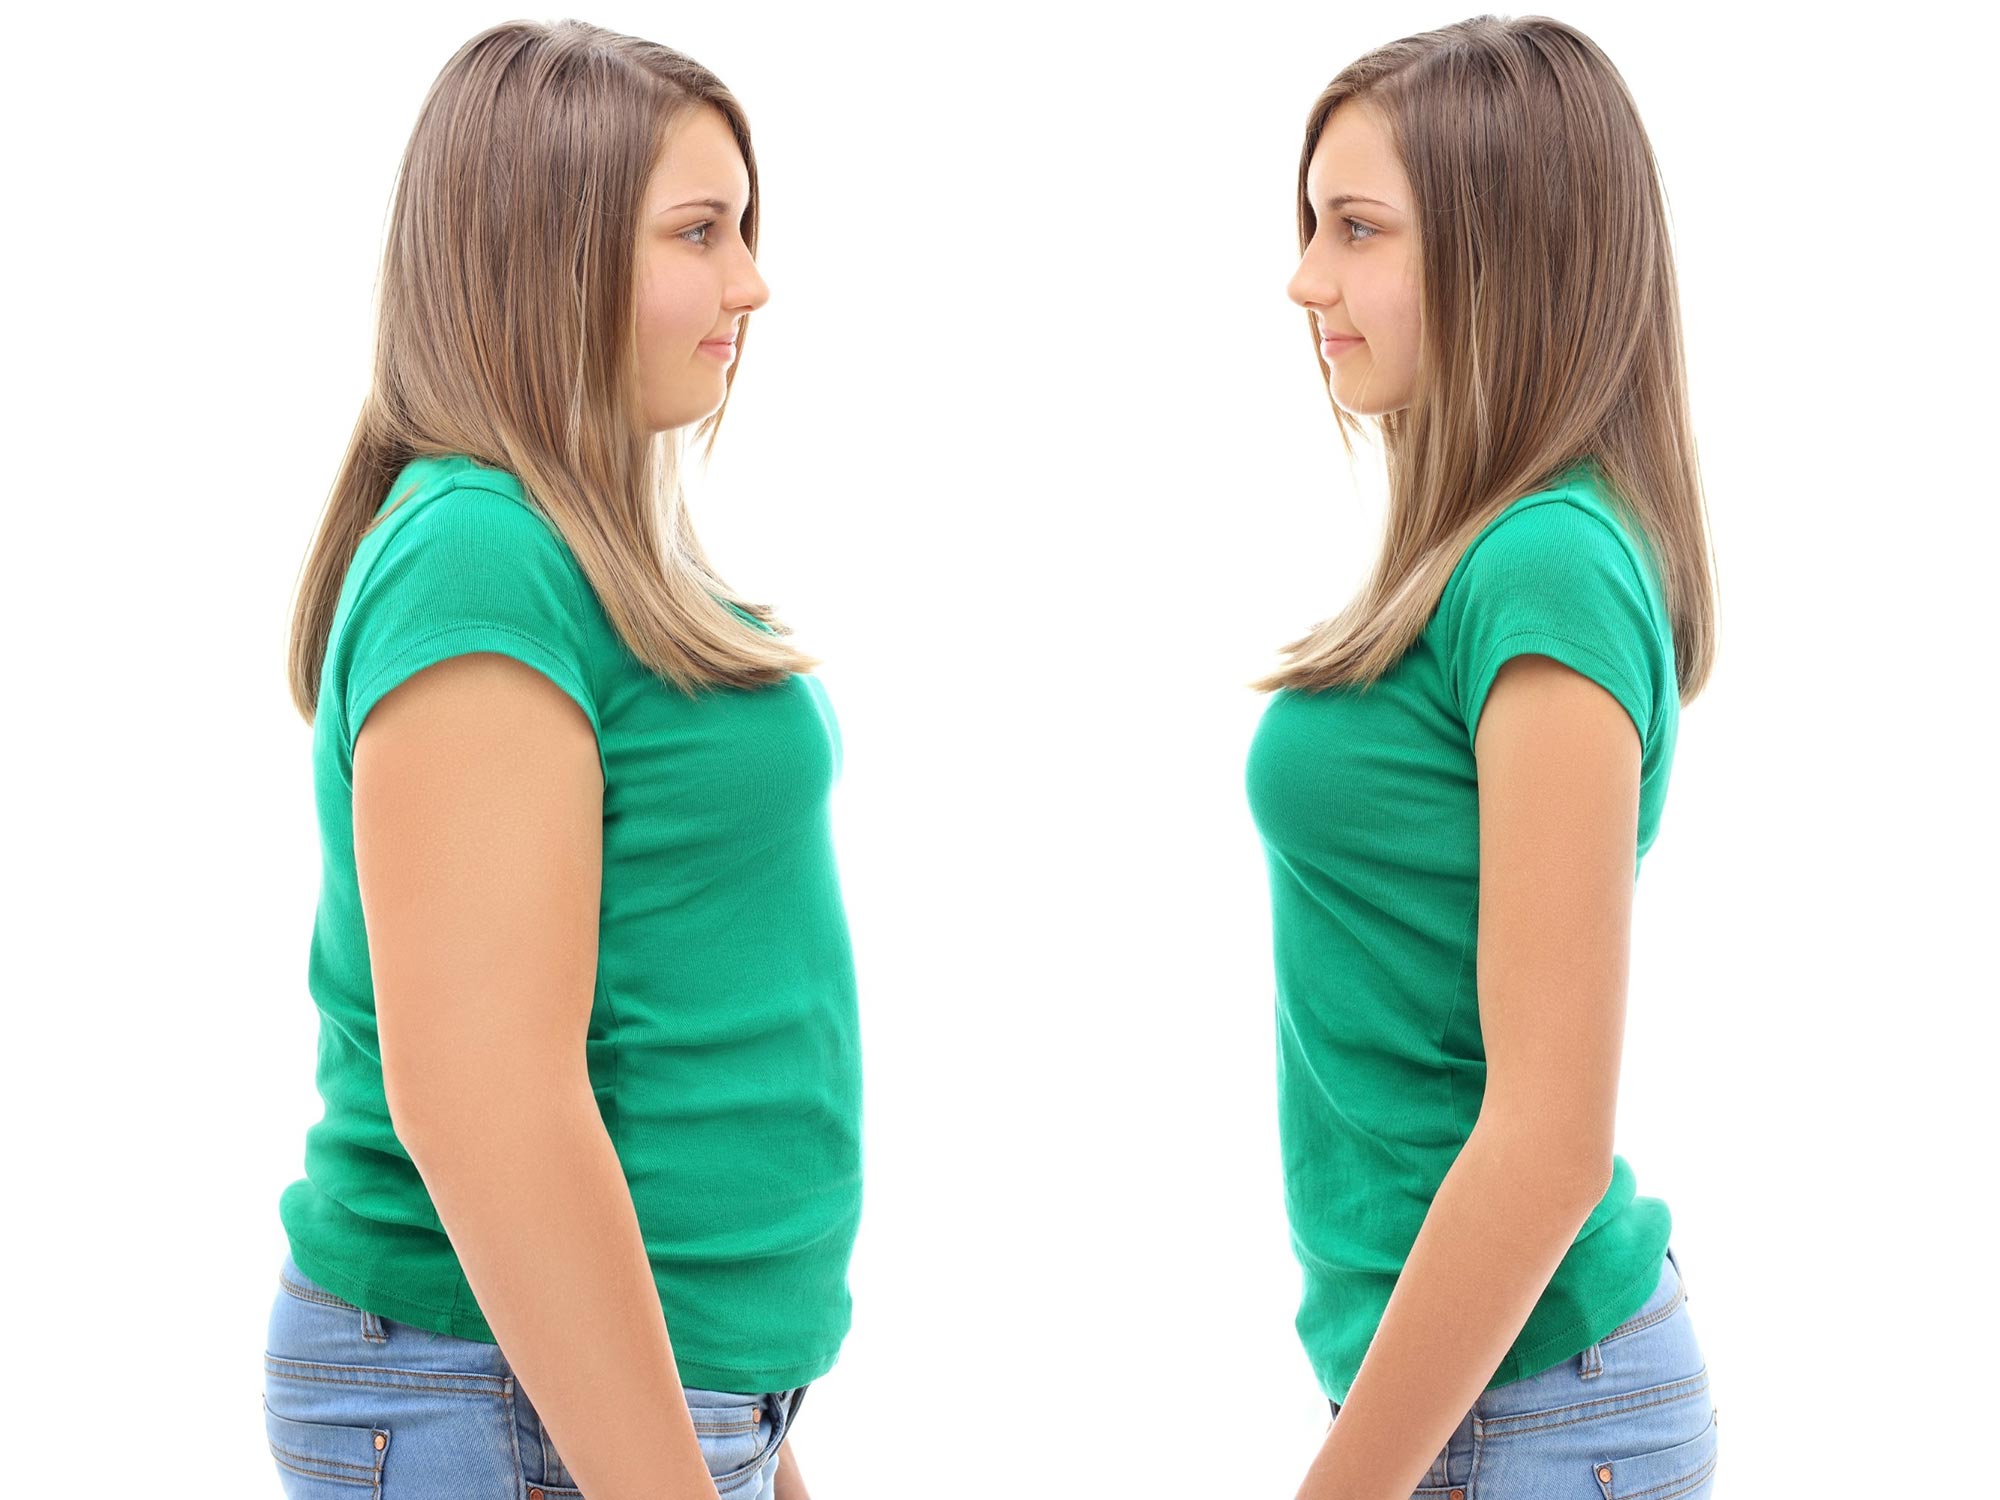 Stanford Study Reveals Secrets to Sustainable Weight Loss: Behaviors and Biomarkers Revealed